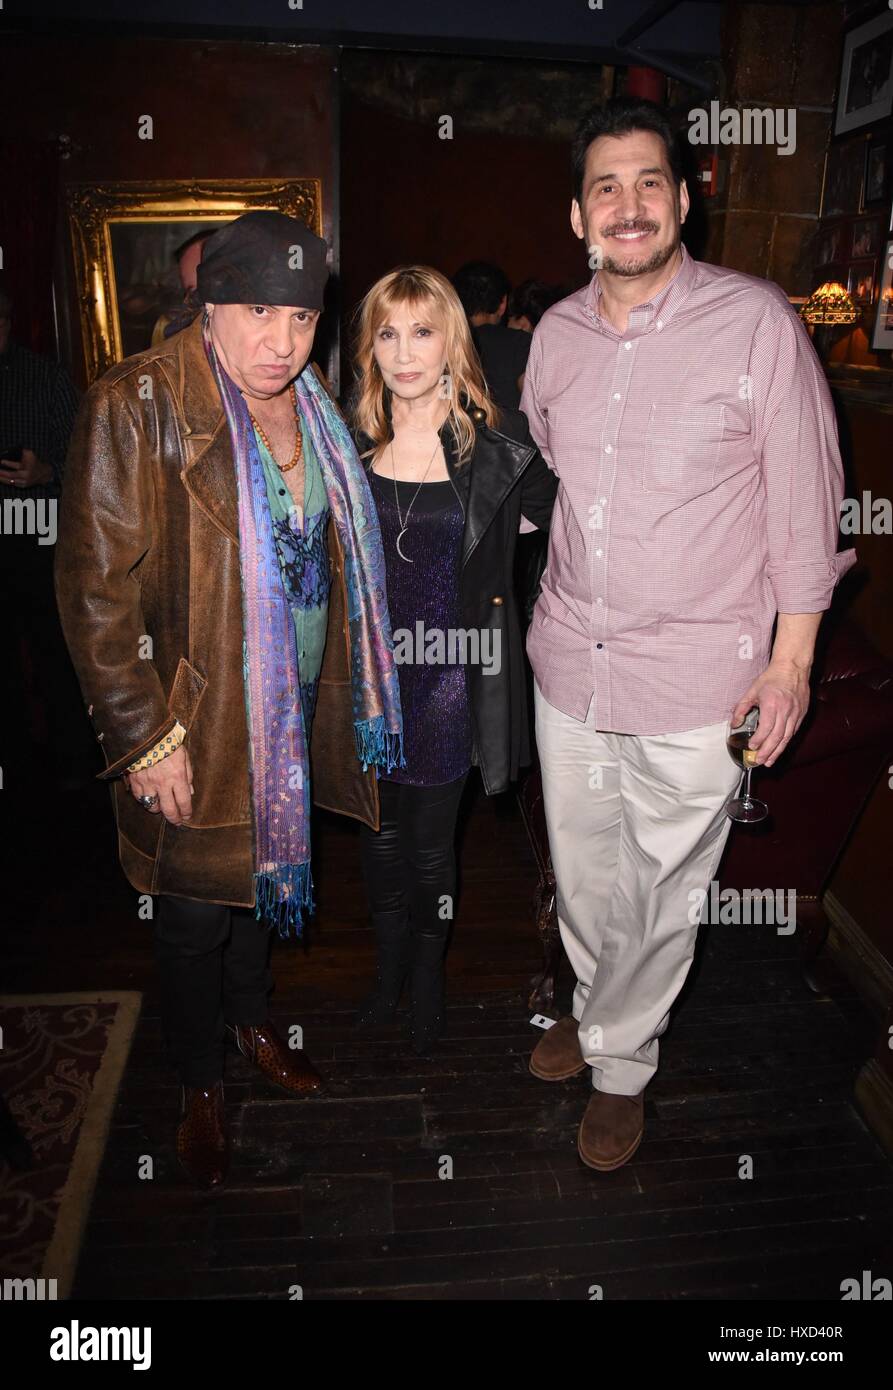 New York, NY, USA. 27th Mar, 2017. Little Steven Van Zandt, Maureen Van Zandt, Robert Funaro at arrivals for Micky Dolenz Private Party, The Cutting Room, New York, NY March 27, 2017. Credit: Derek Storm/Everett Collection/Alamy Live News Stock Photo